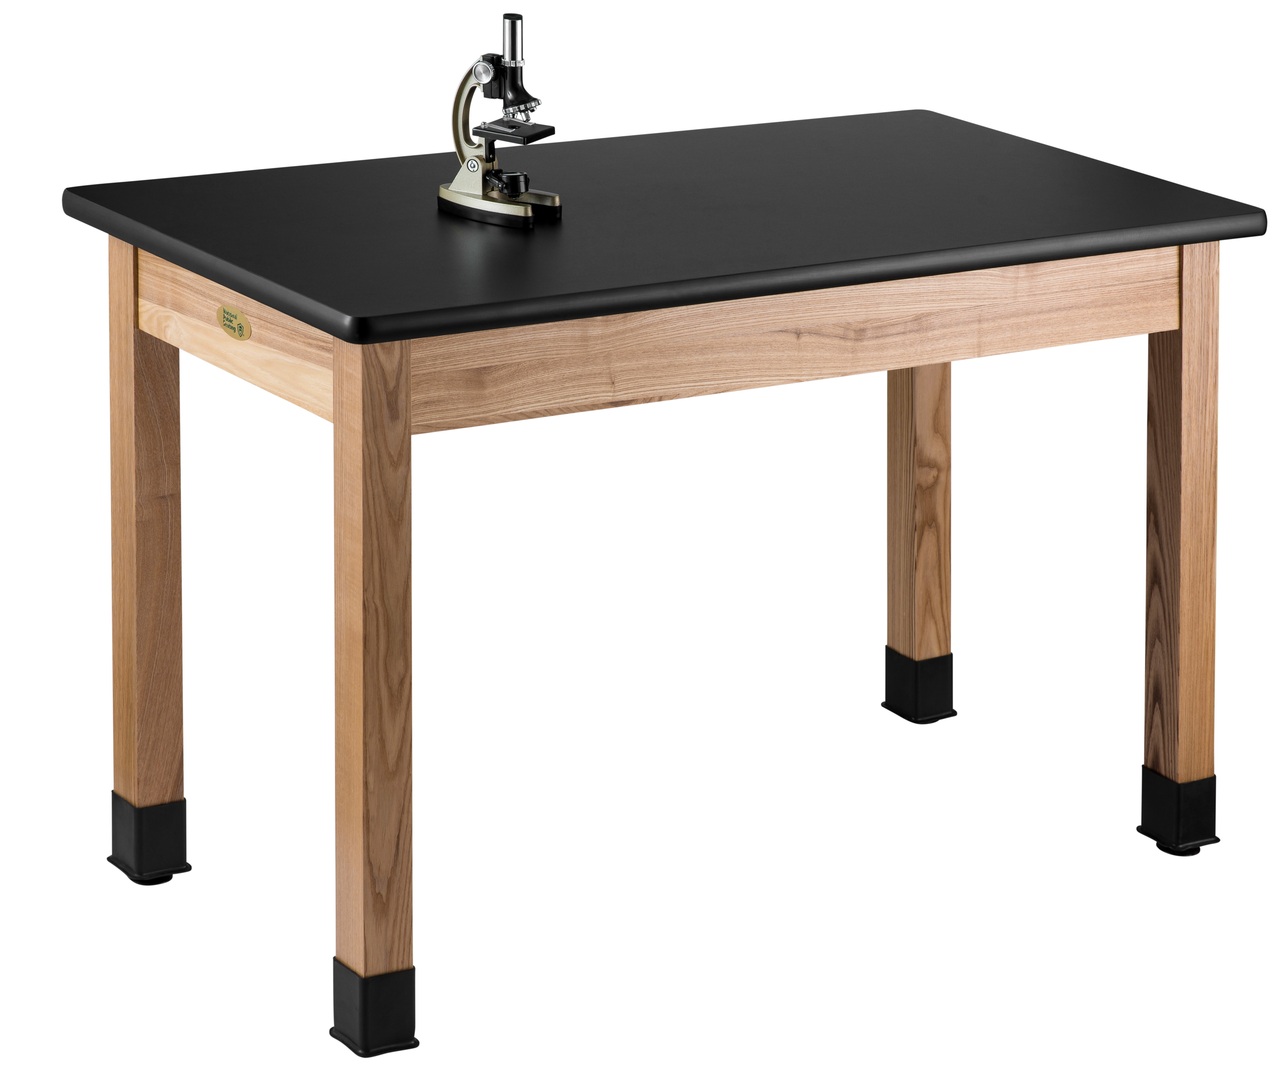 NPS Wood Science Lab Table -  24"x60"x36" -  HPL Top - Black Top and Ash Leg